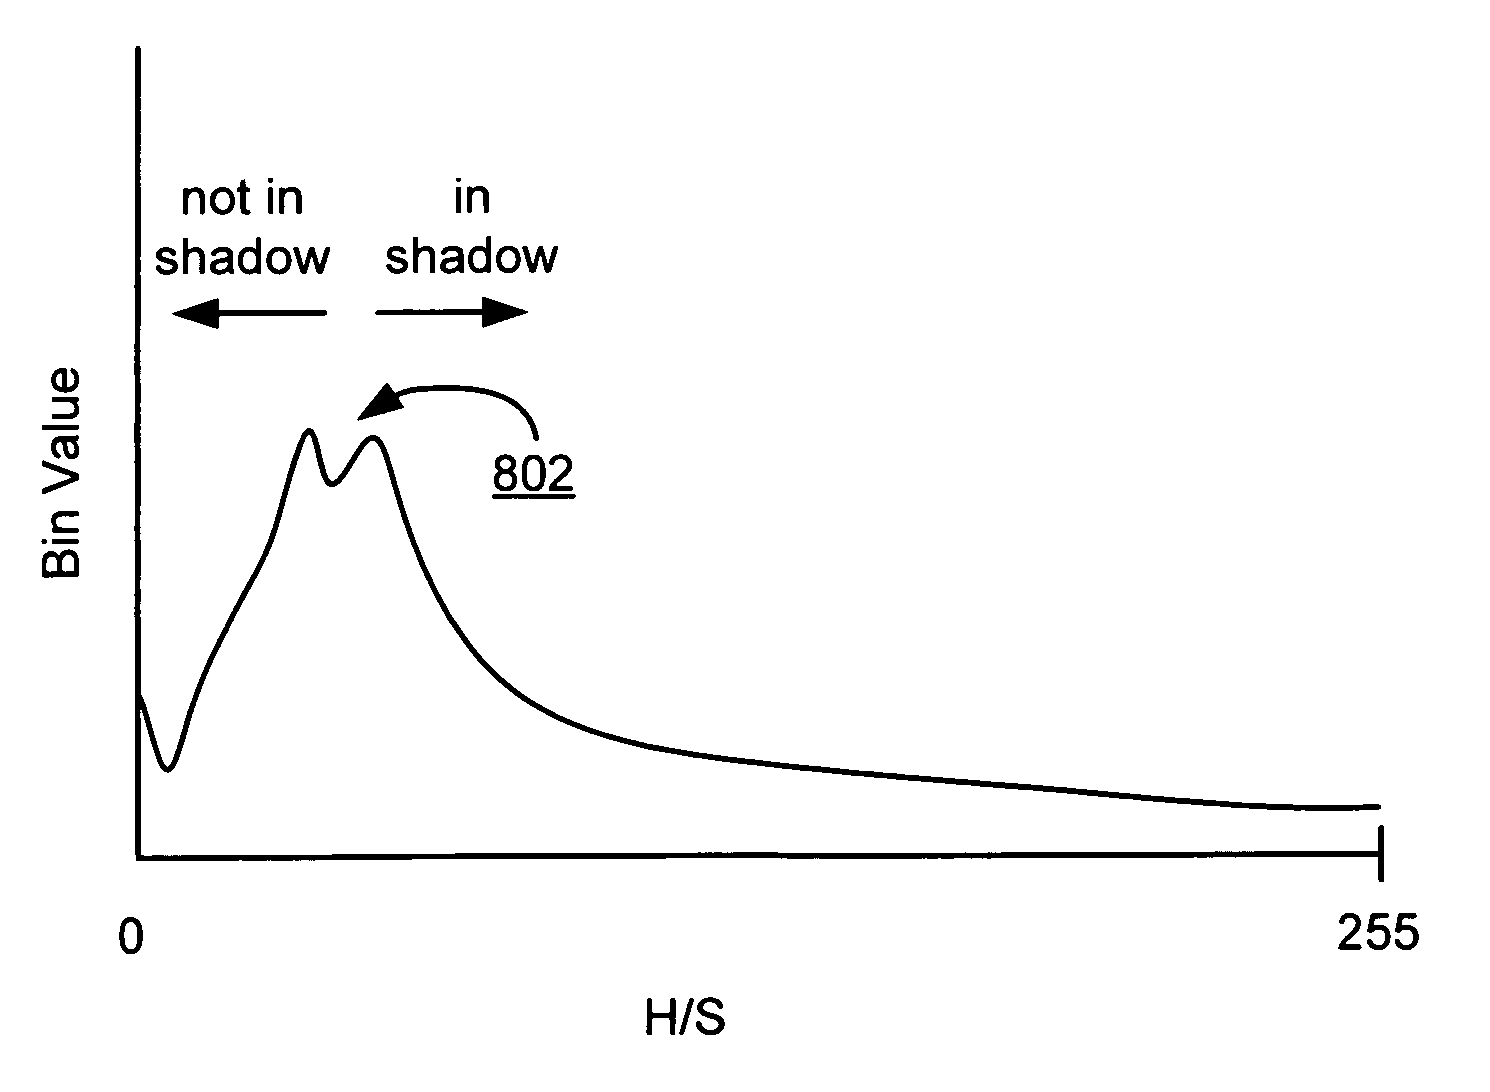 Detection and manipulation of shadows in an image or series of images